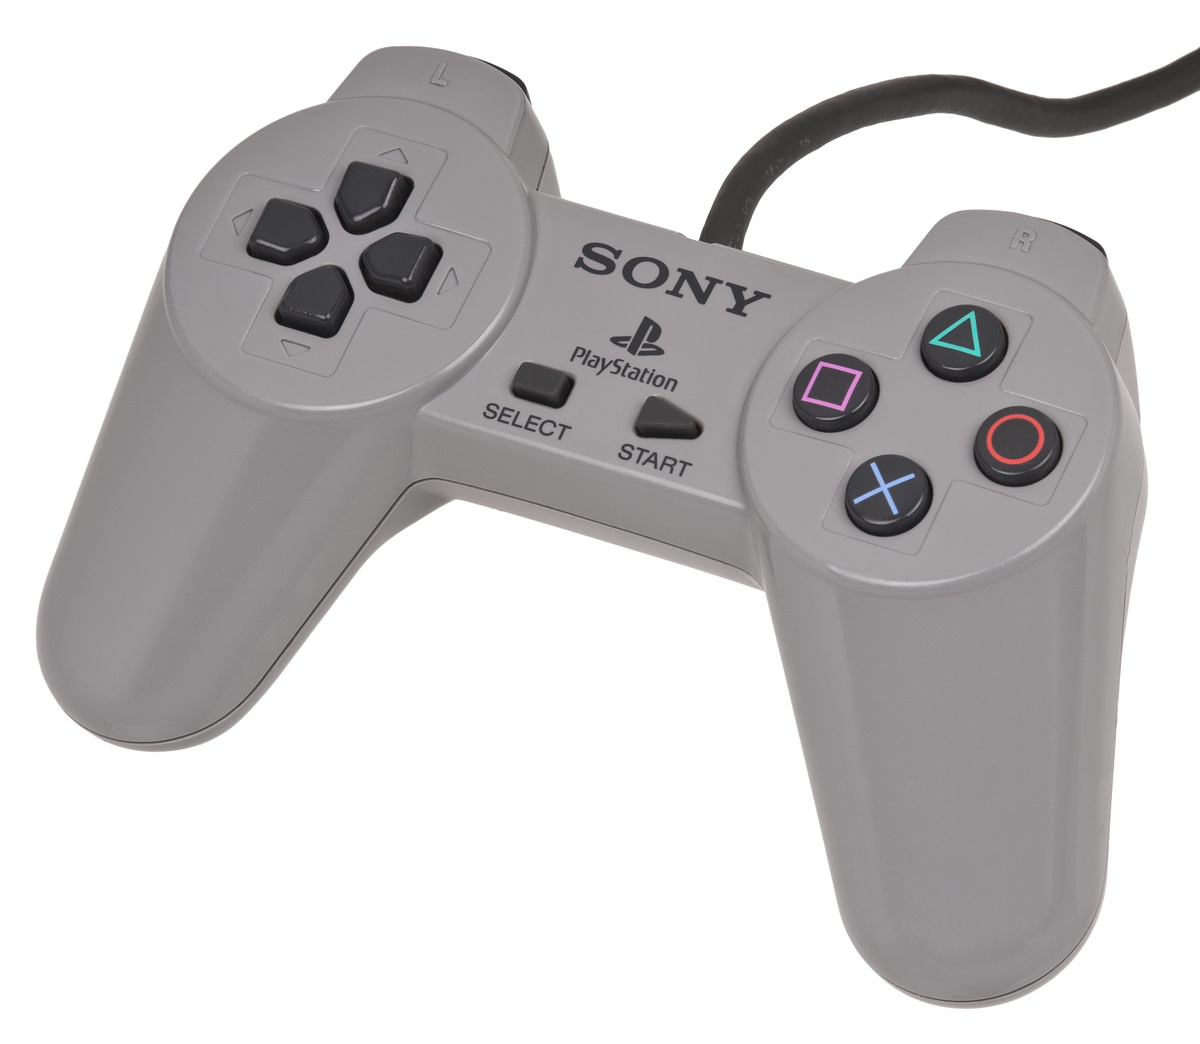 The Evolution of the PlayStation Controllers